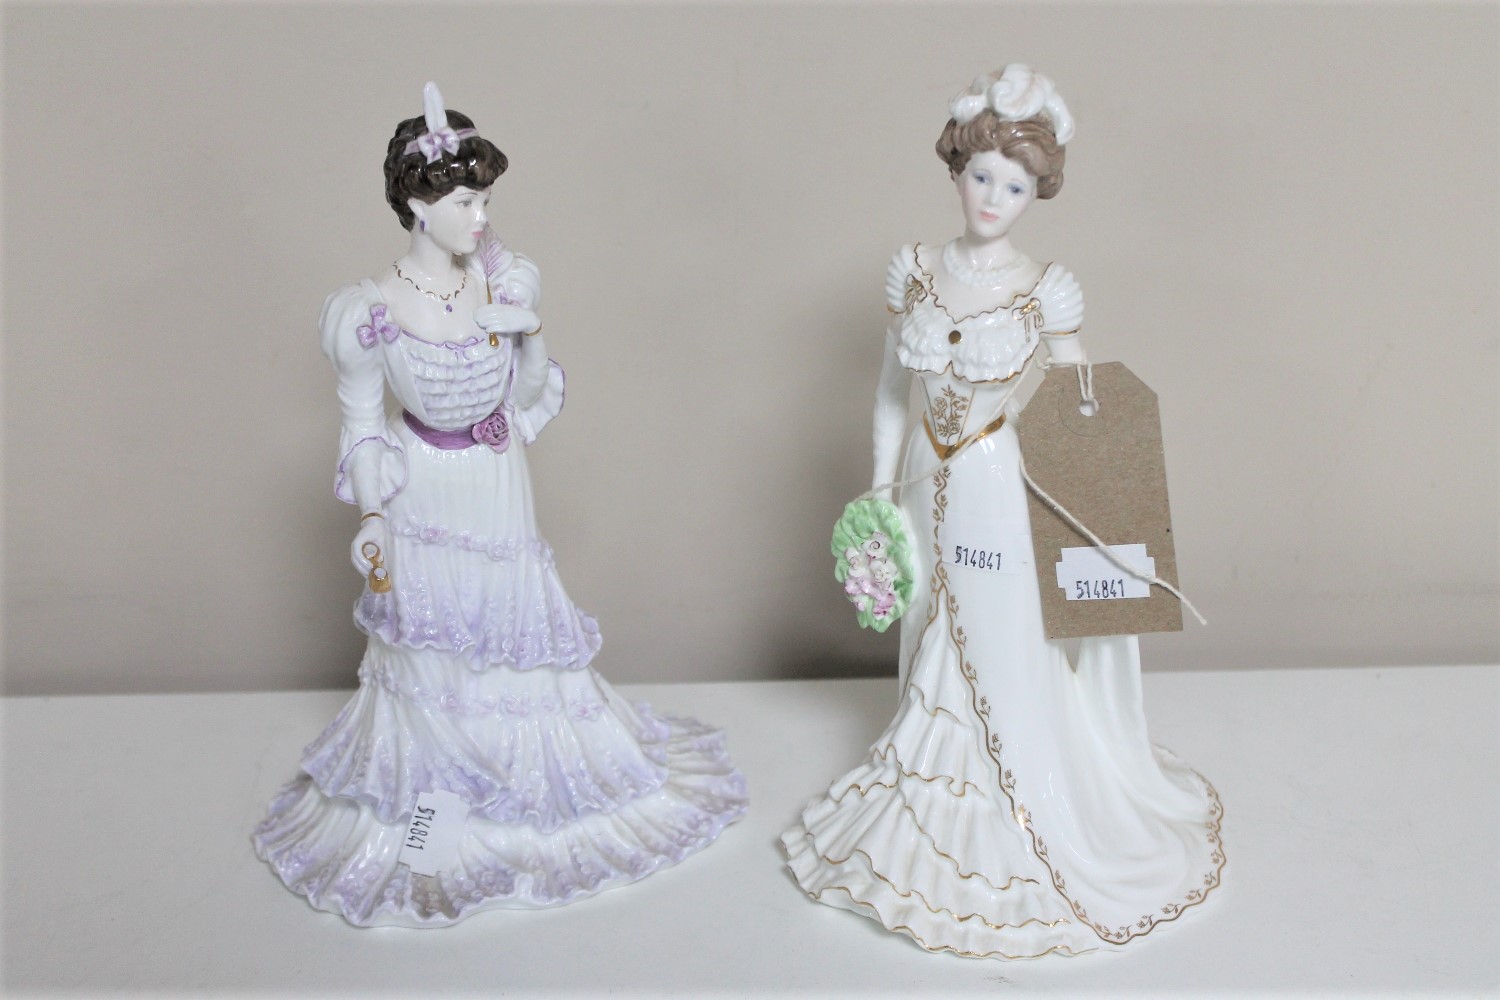 Two Coalport Golden Age figures - Eugene First Night at the Opera 2499 of 12500 and Charlotte a